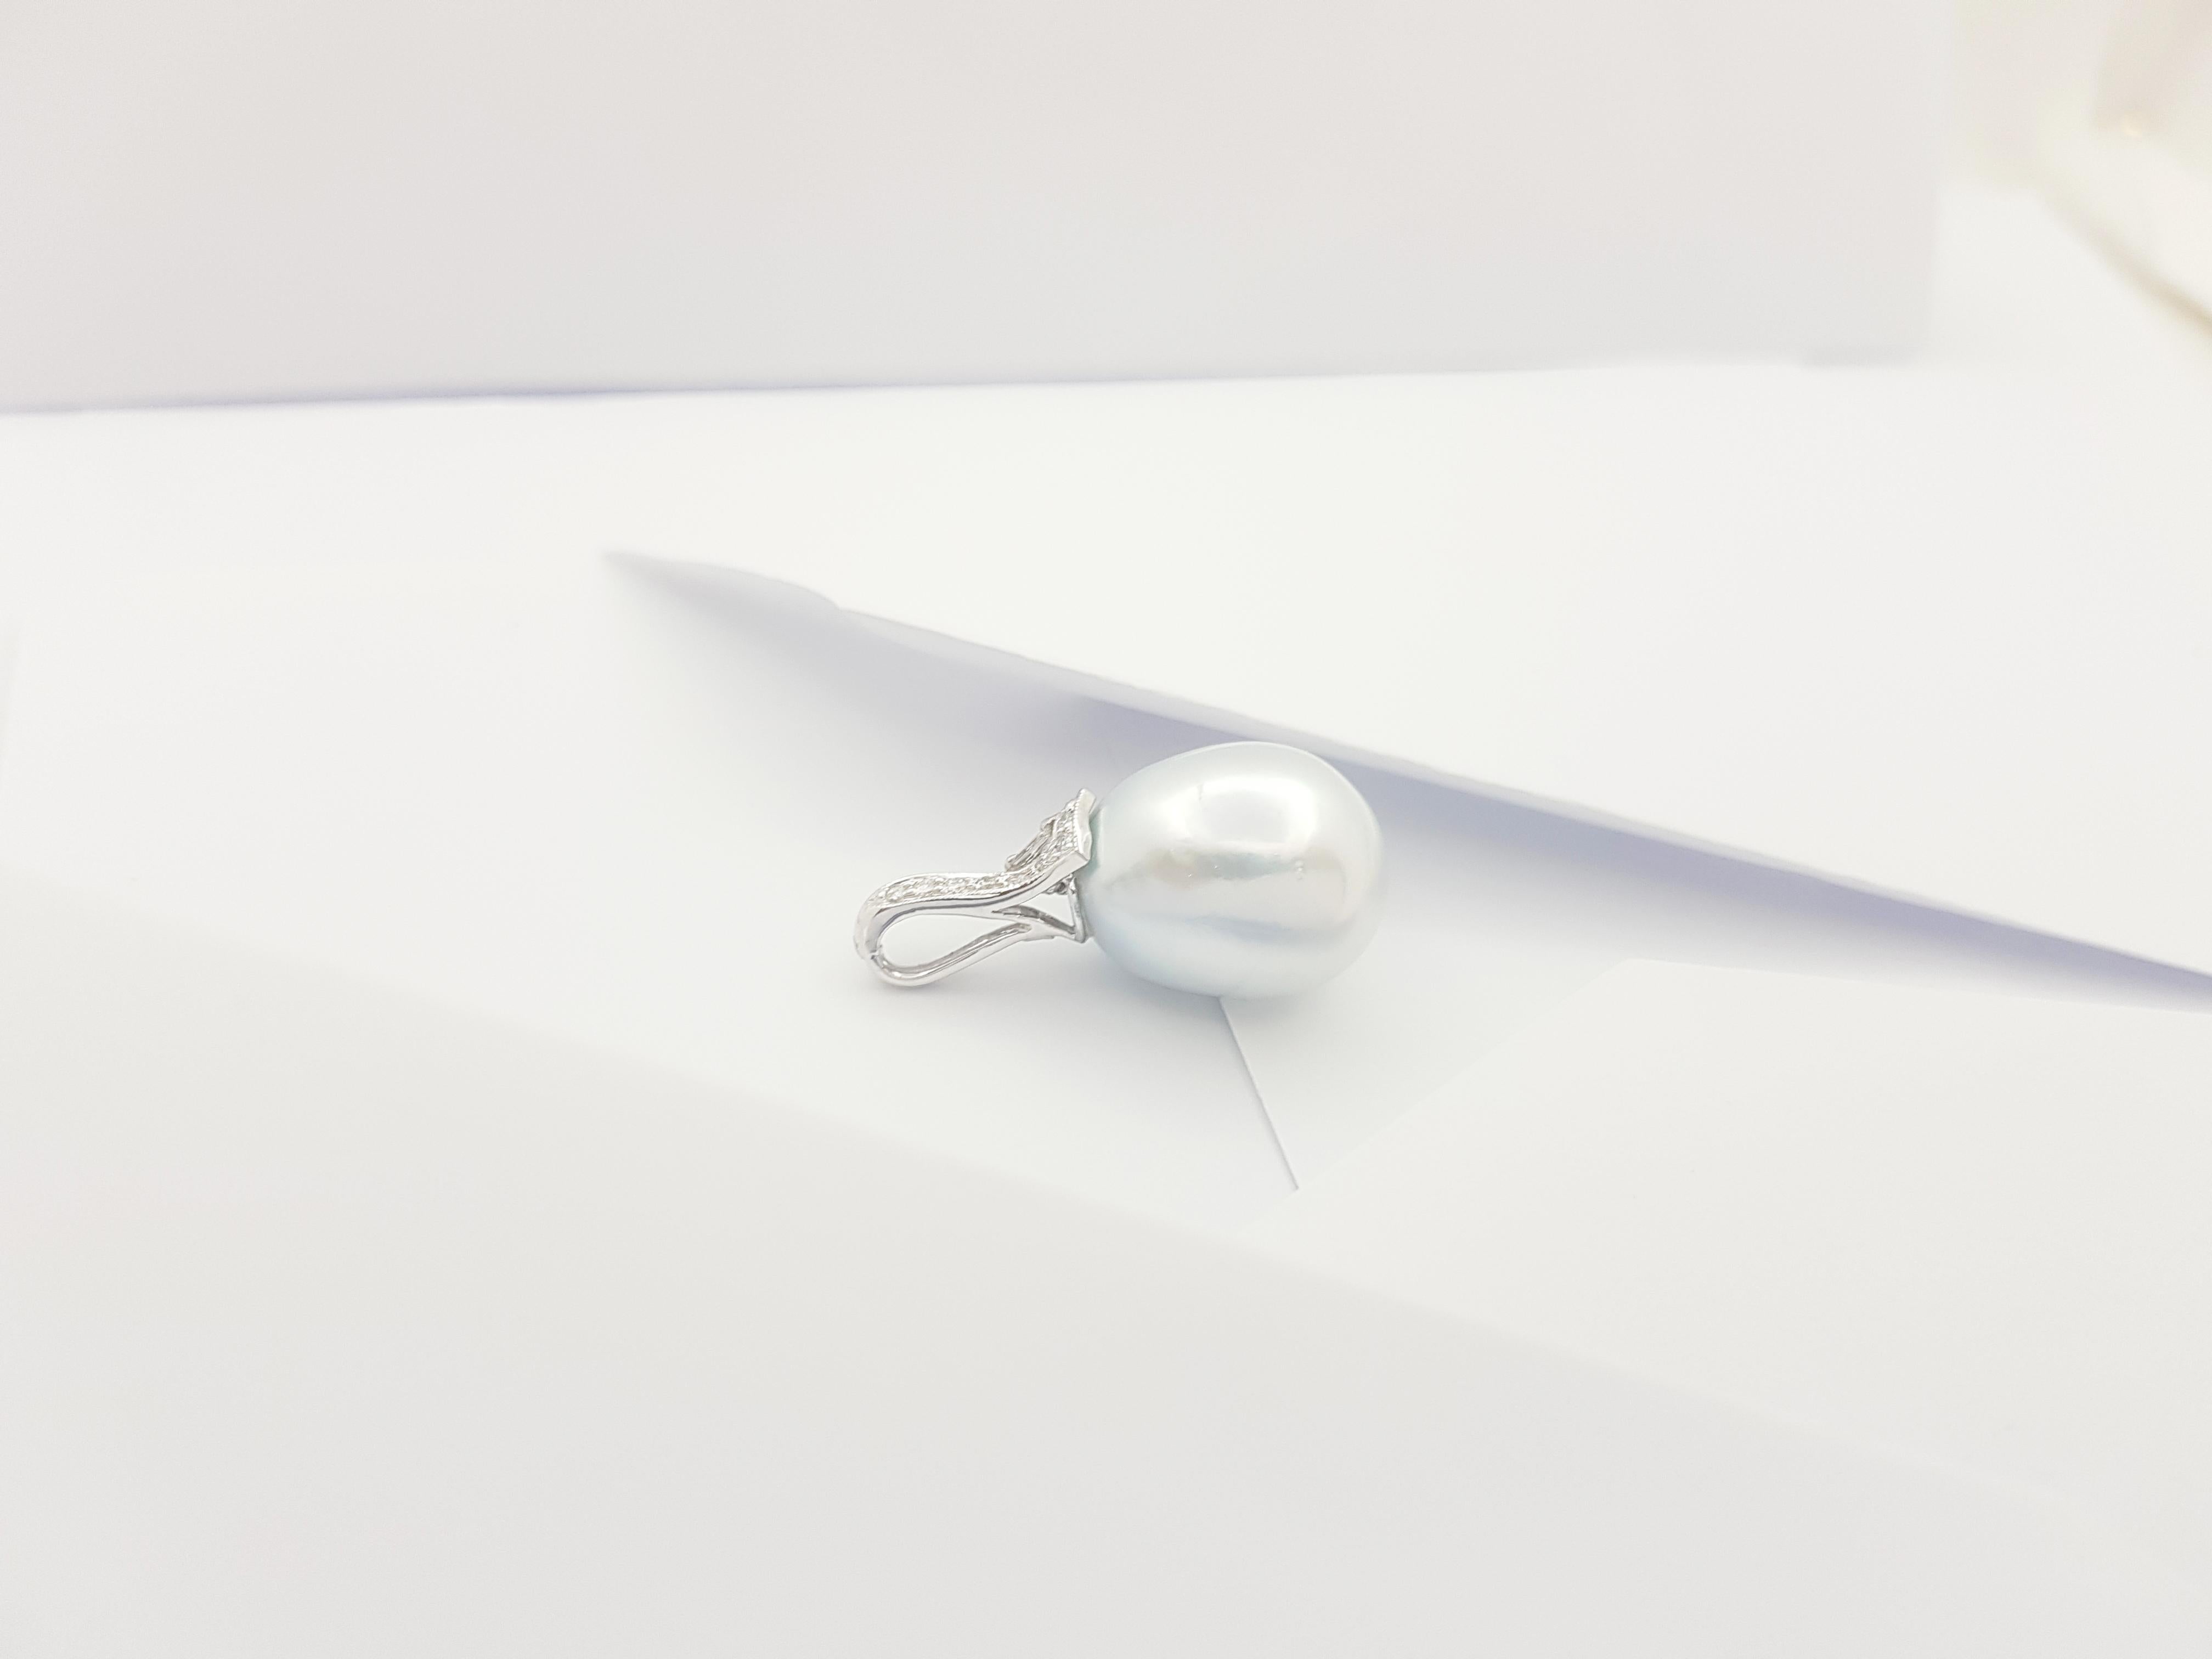 Brilliant Cut South Sea Pearl with Diamond Pendant set in 18K White Gold Settings For Sale